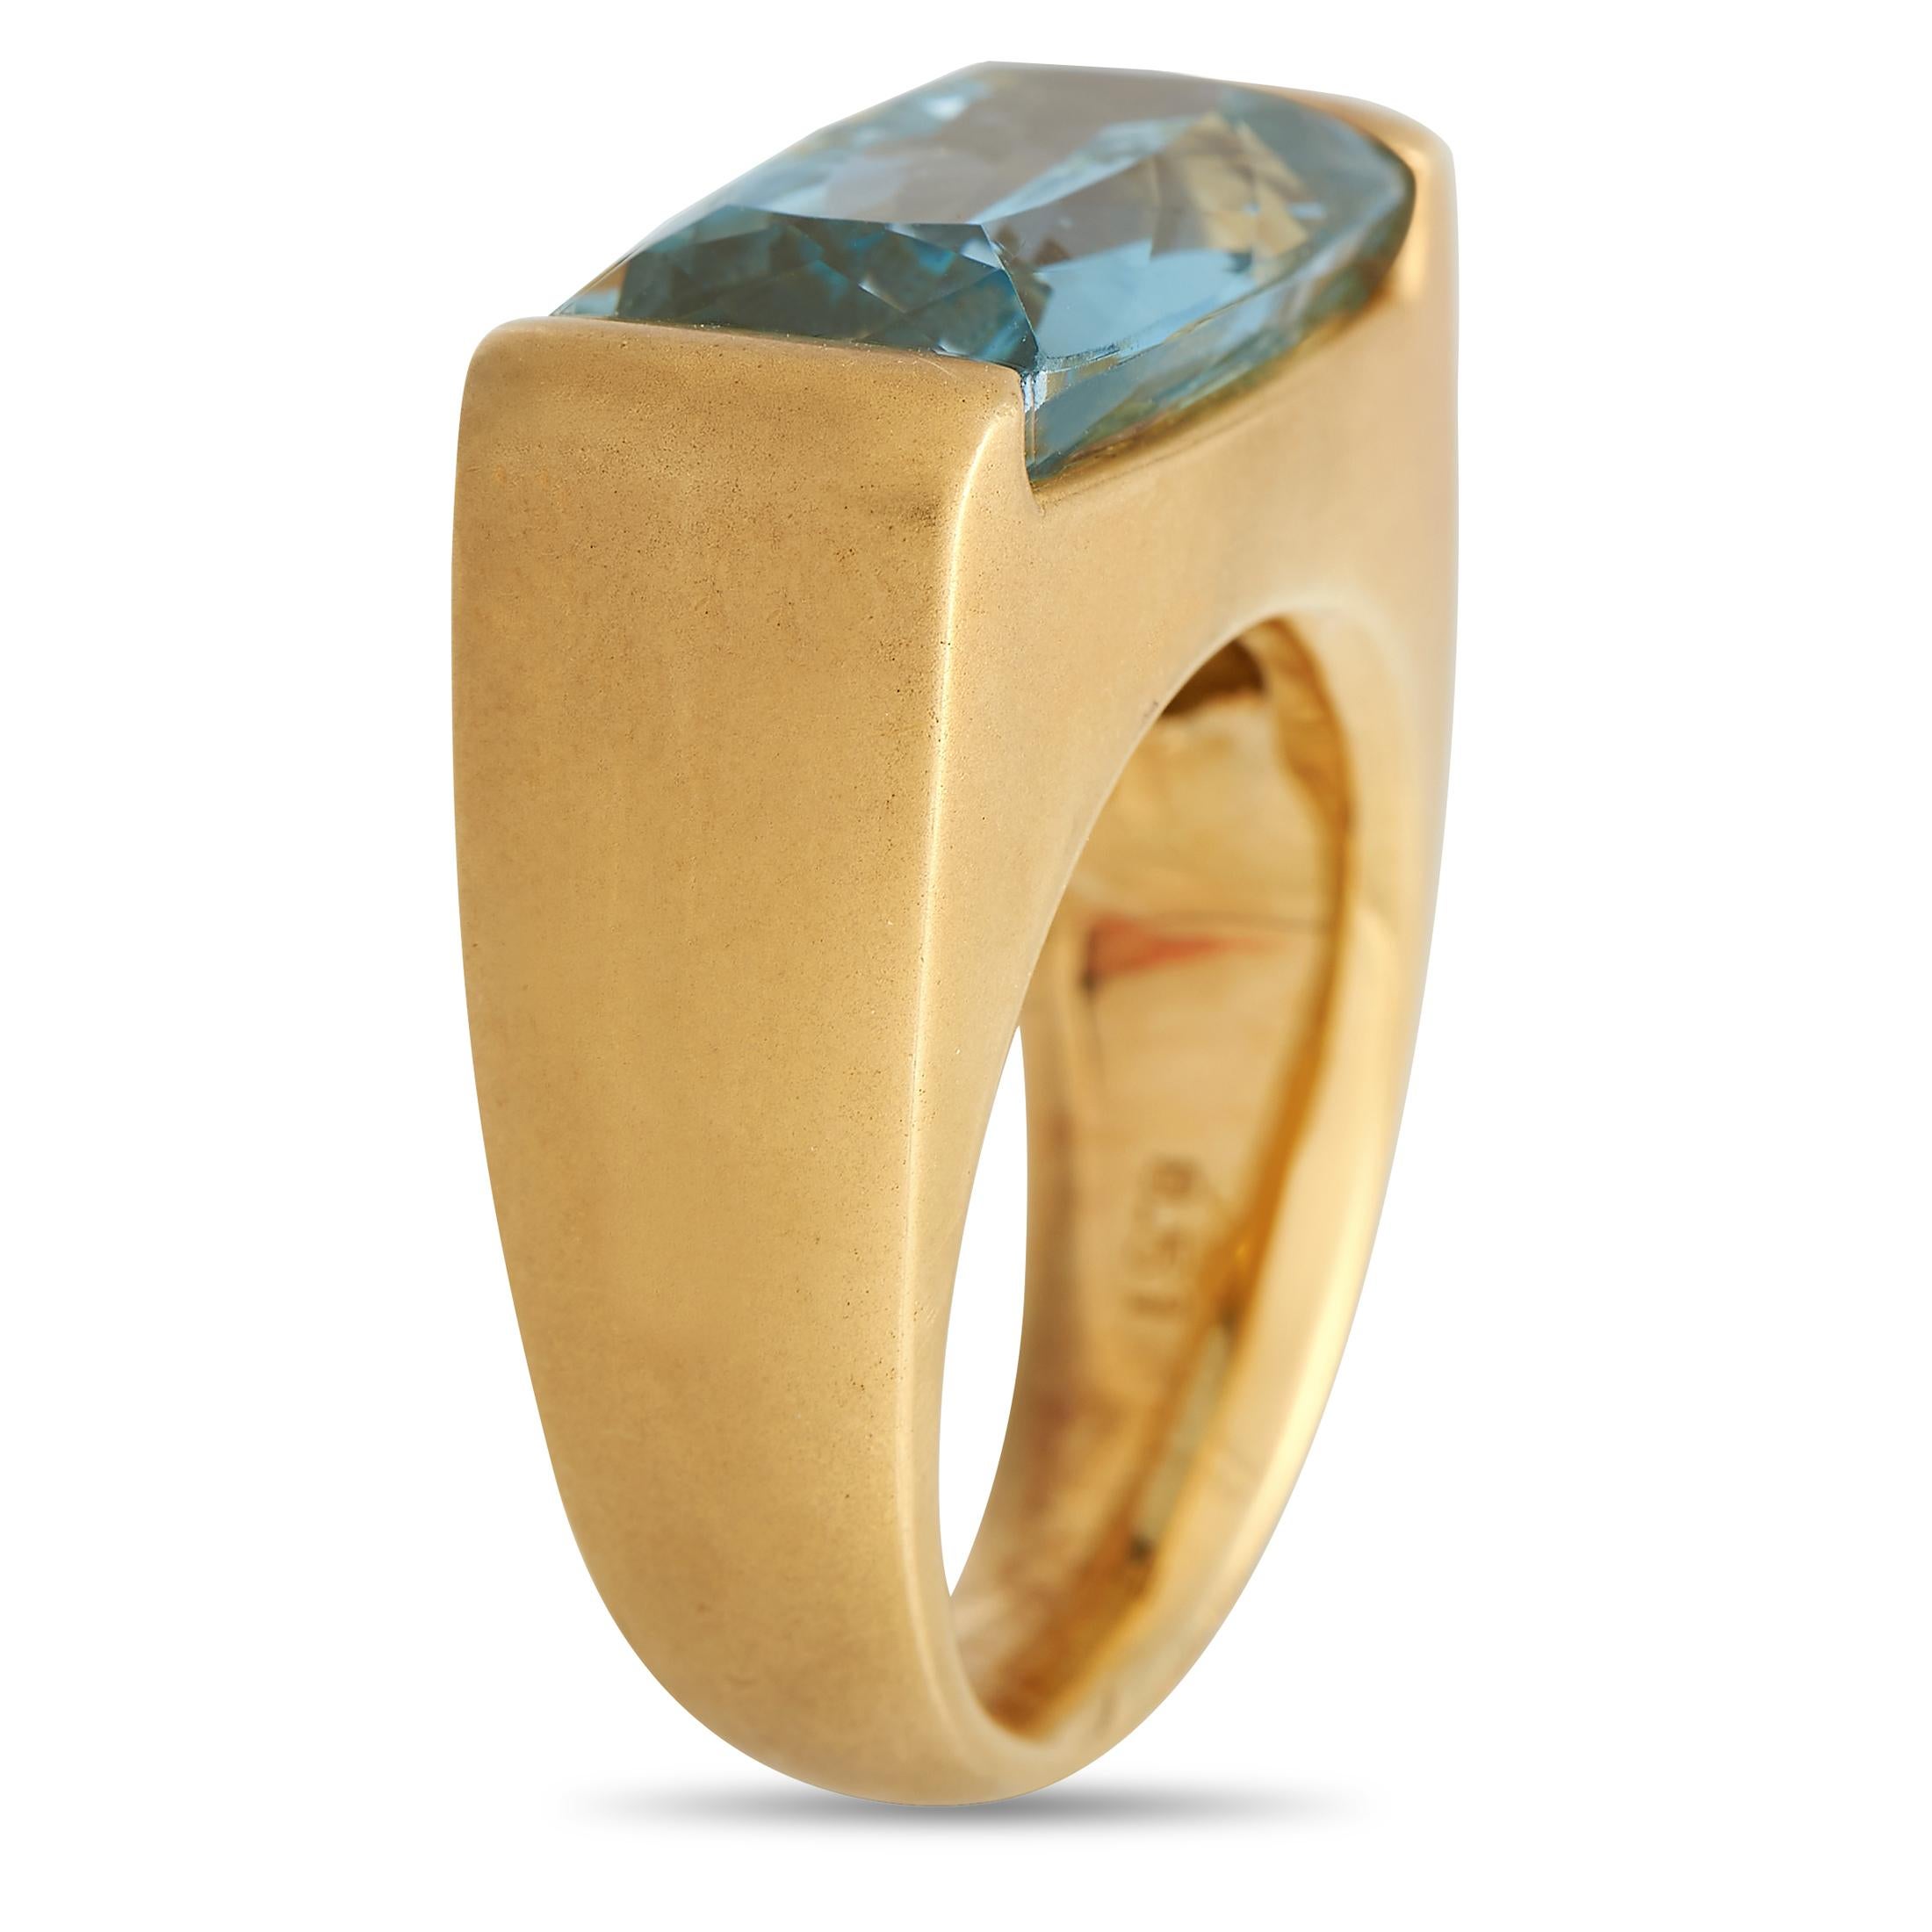 This sleek, sophisticated ring will continually capture your imagination. At the center of the minimalist 18K Yellow Gold setting, you\u2019ll find a breathtaking 8.51 carat Aquamarine gemstone. A 6mm band width and a 7mm top height make it a piece